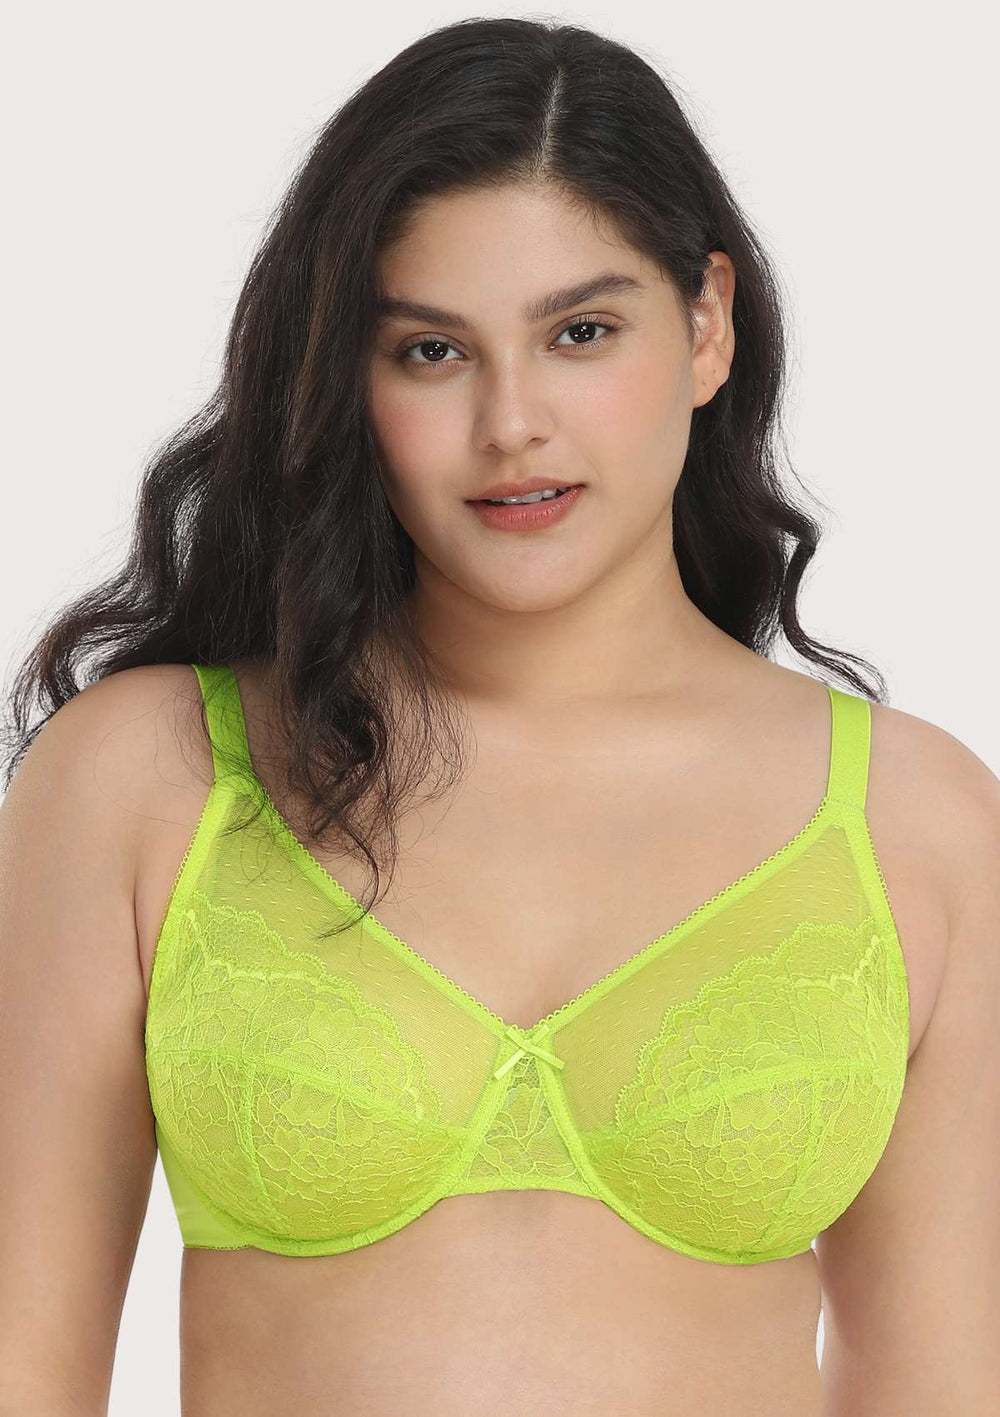 Sea green lace underwire push-up Bra- bow detail - Size 30C